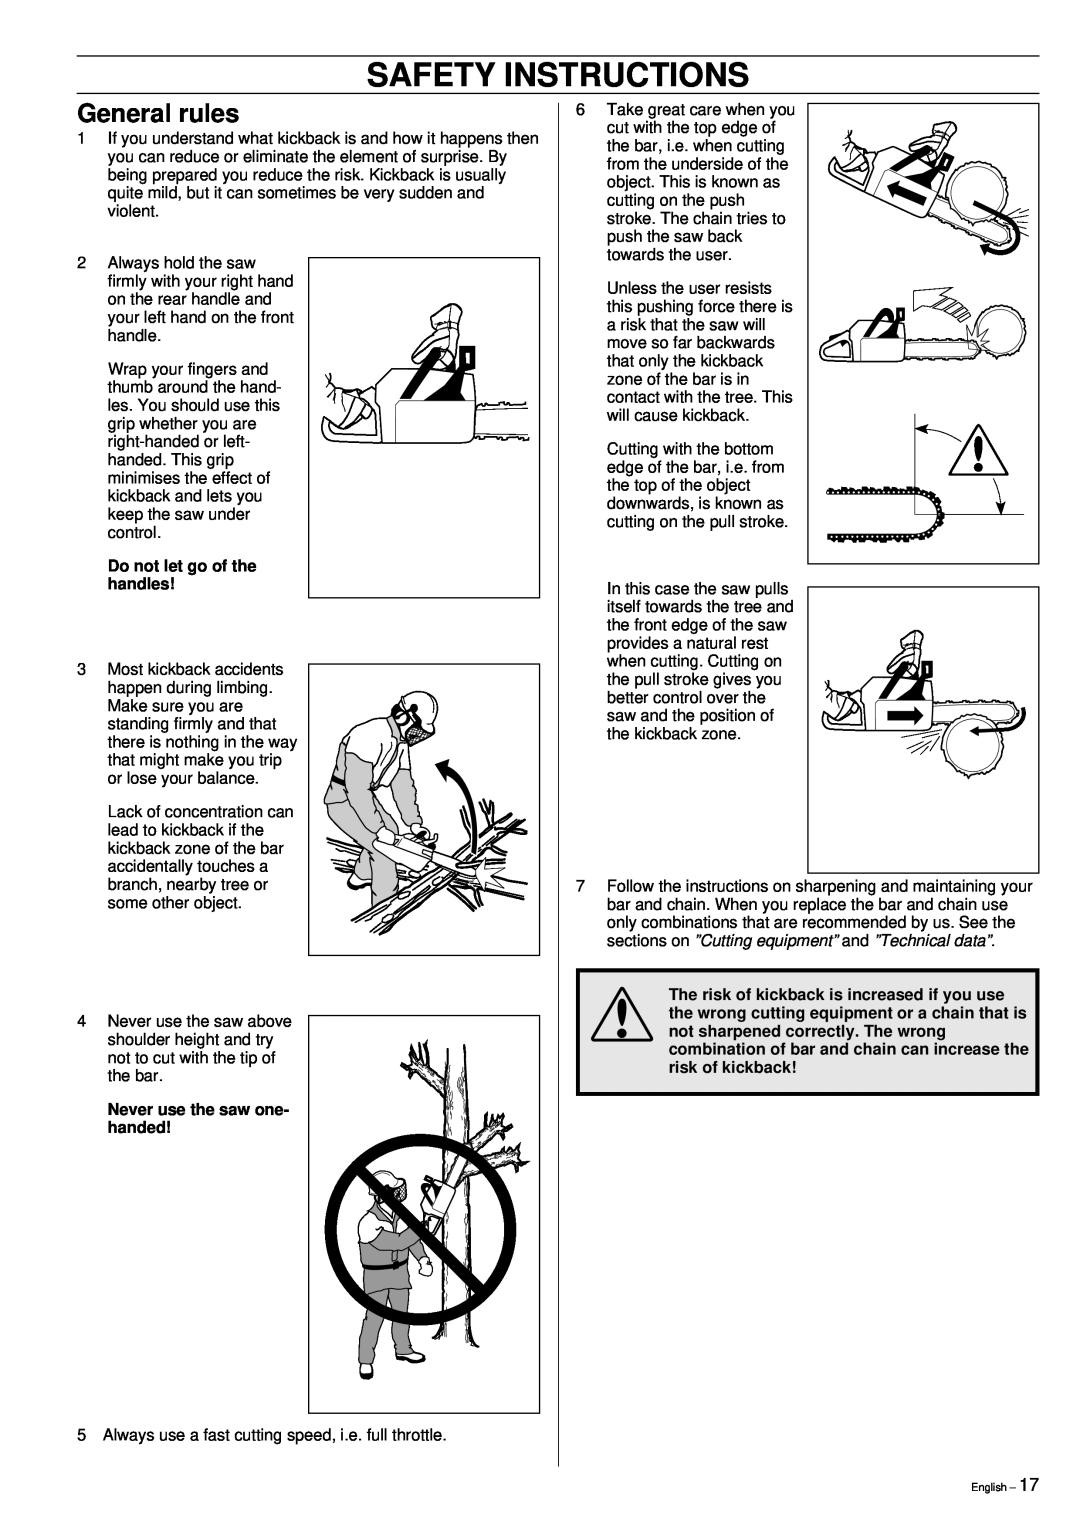 Jonsered 2149 manual General rules, Safety Instructions, Do not let go of the handles, Never use the saw one- handed 